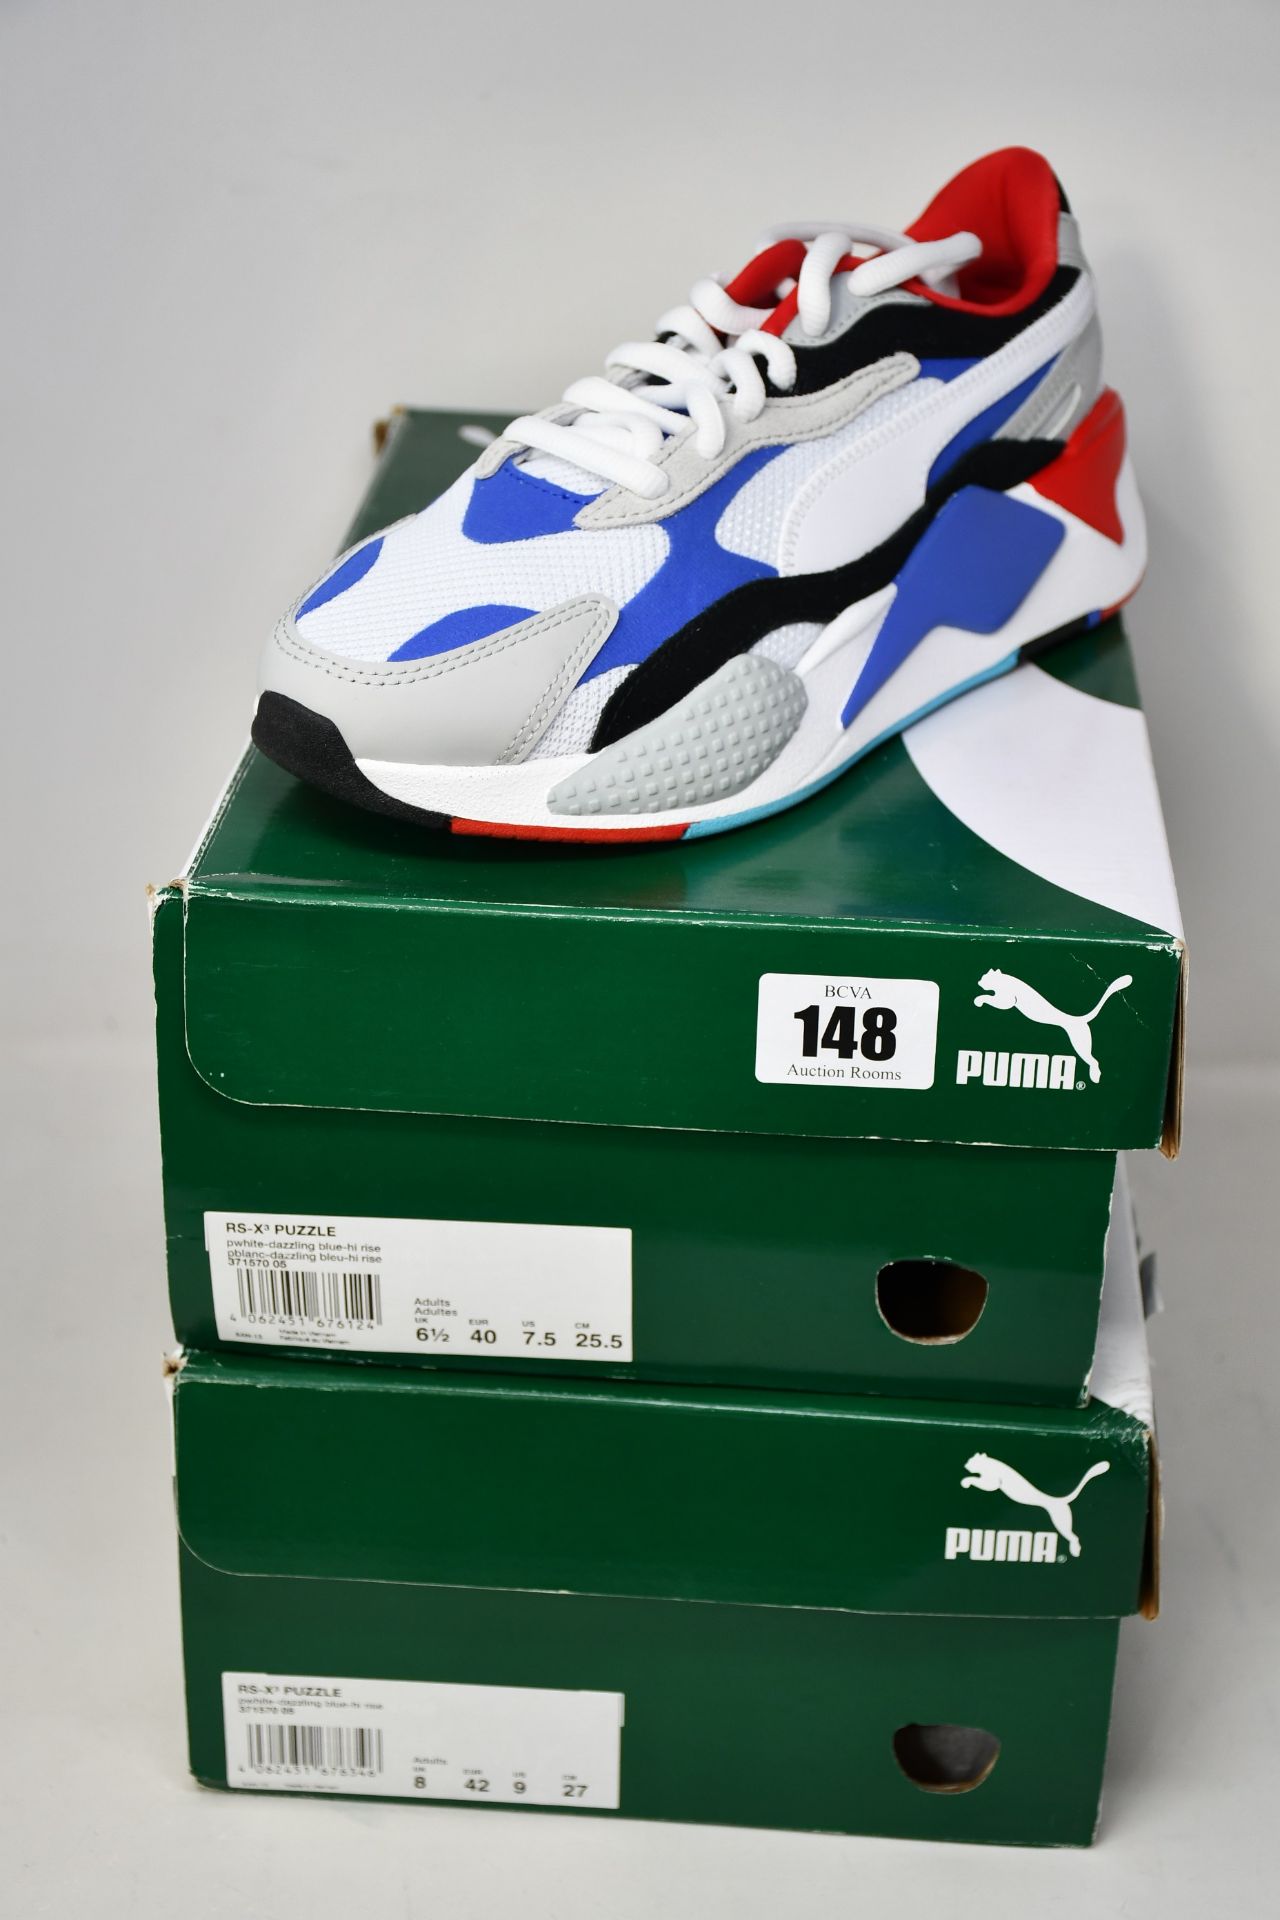 Two pairs of as new Puma RS-X3 Puzzle trainers (UK 6.5, 8).